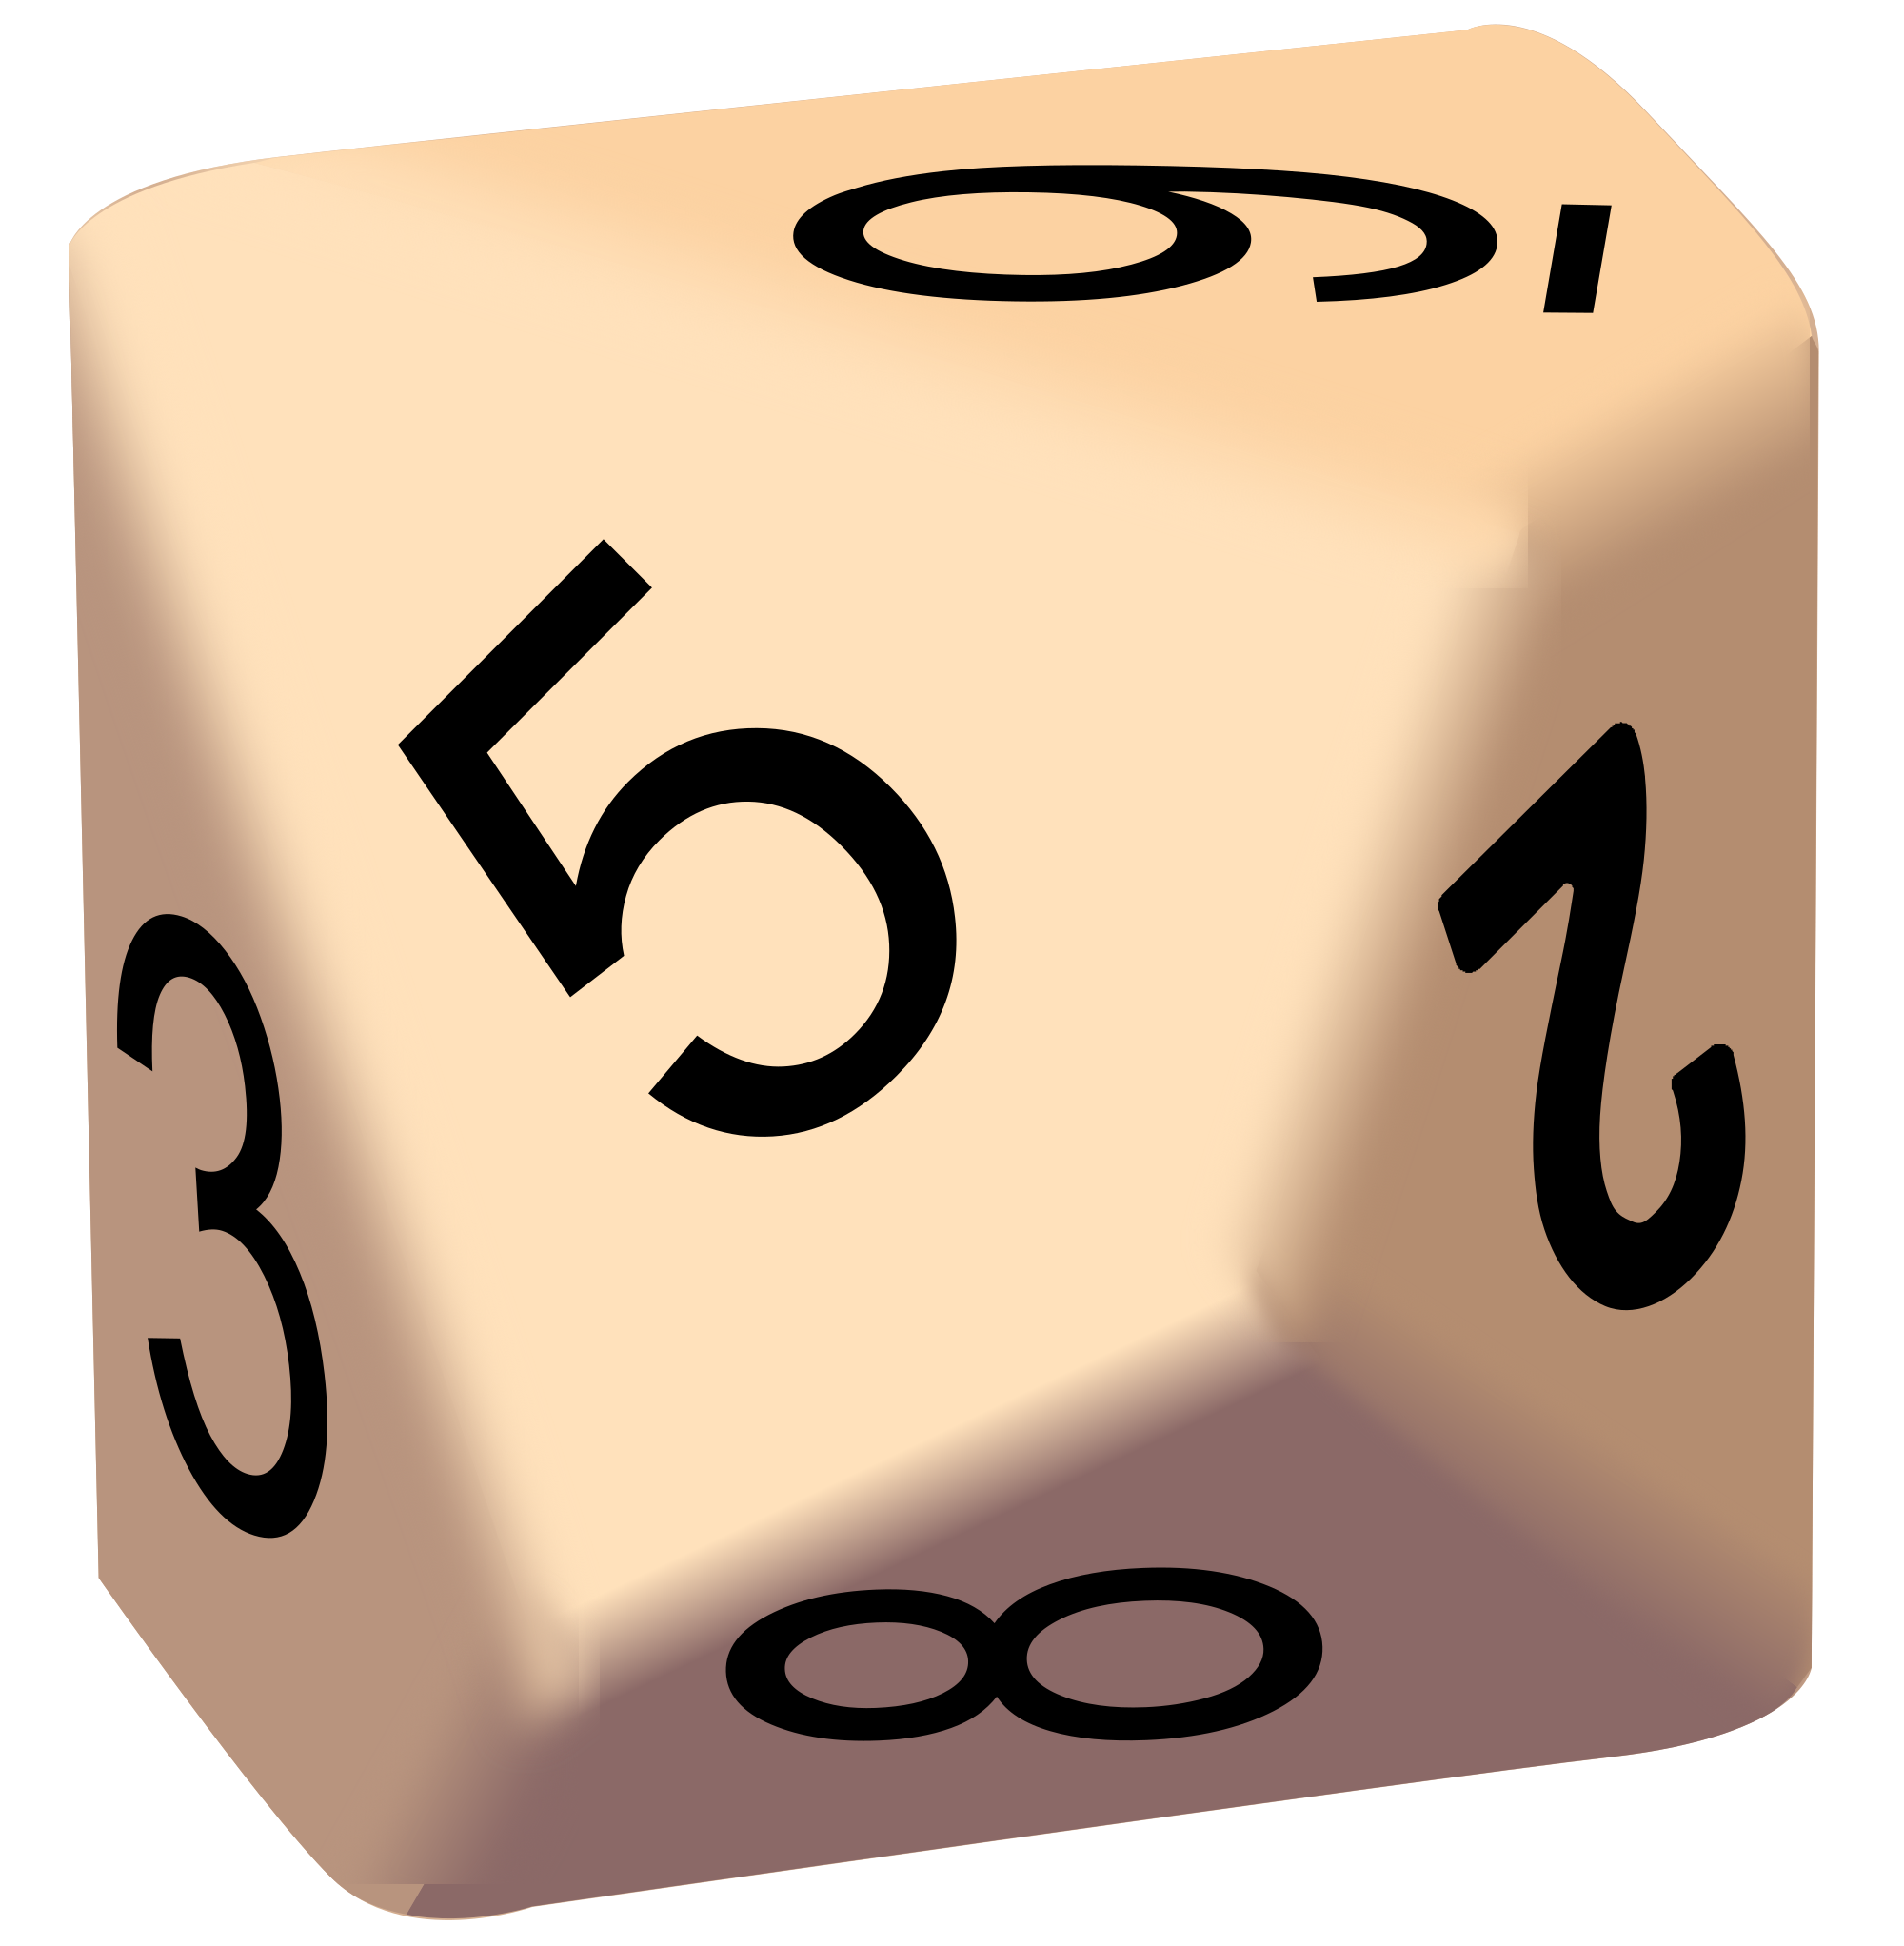 10 Sided Dice Clipart.